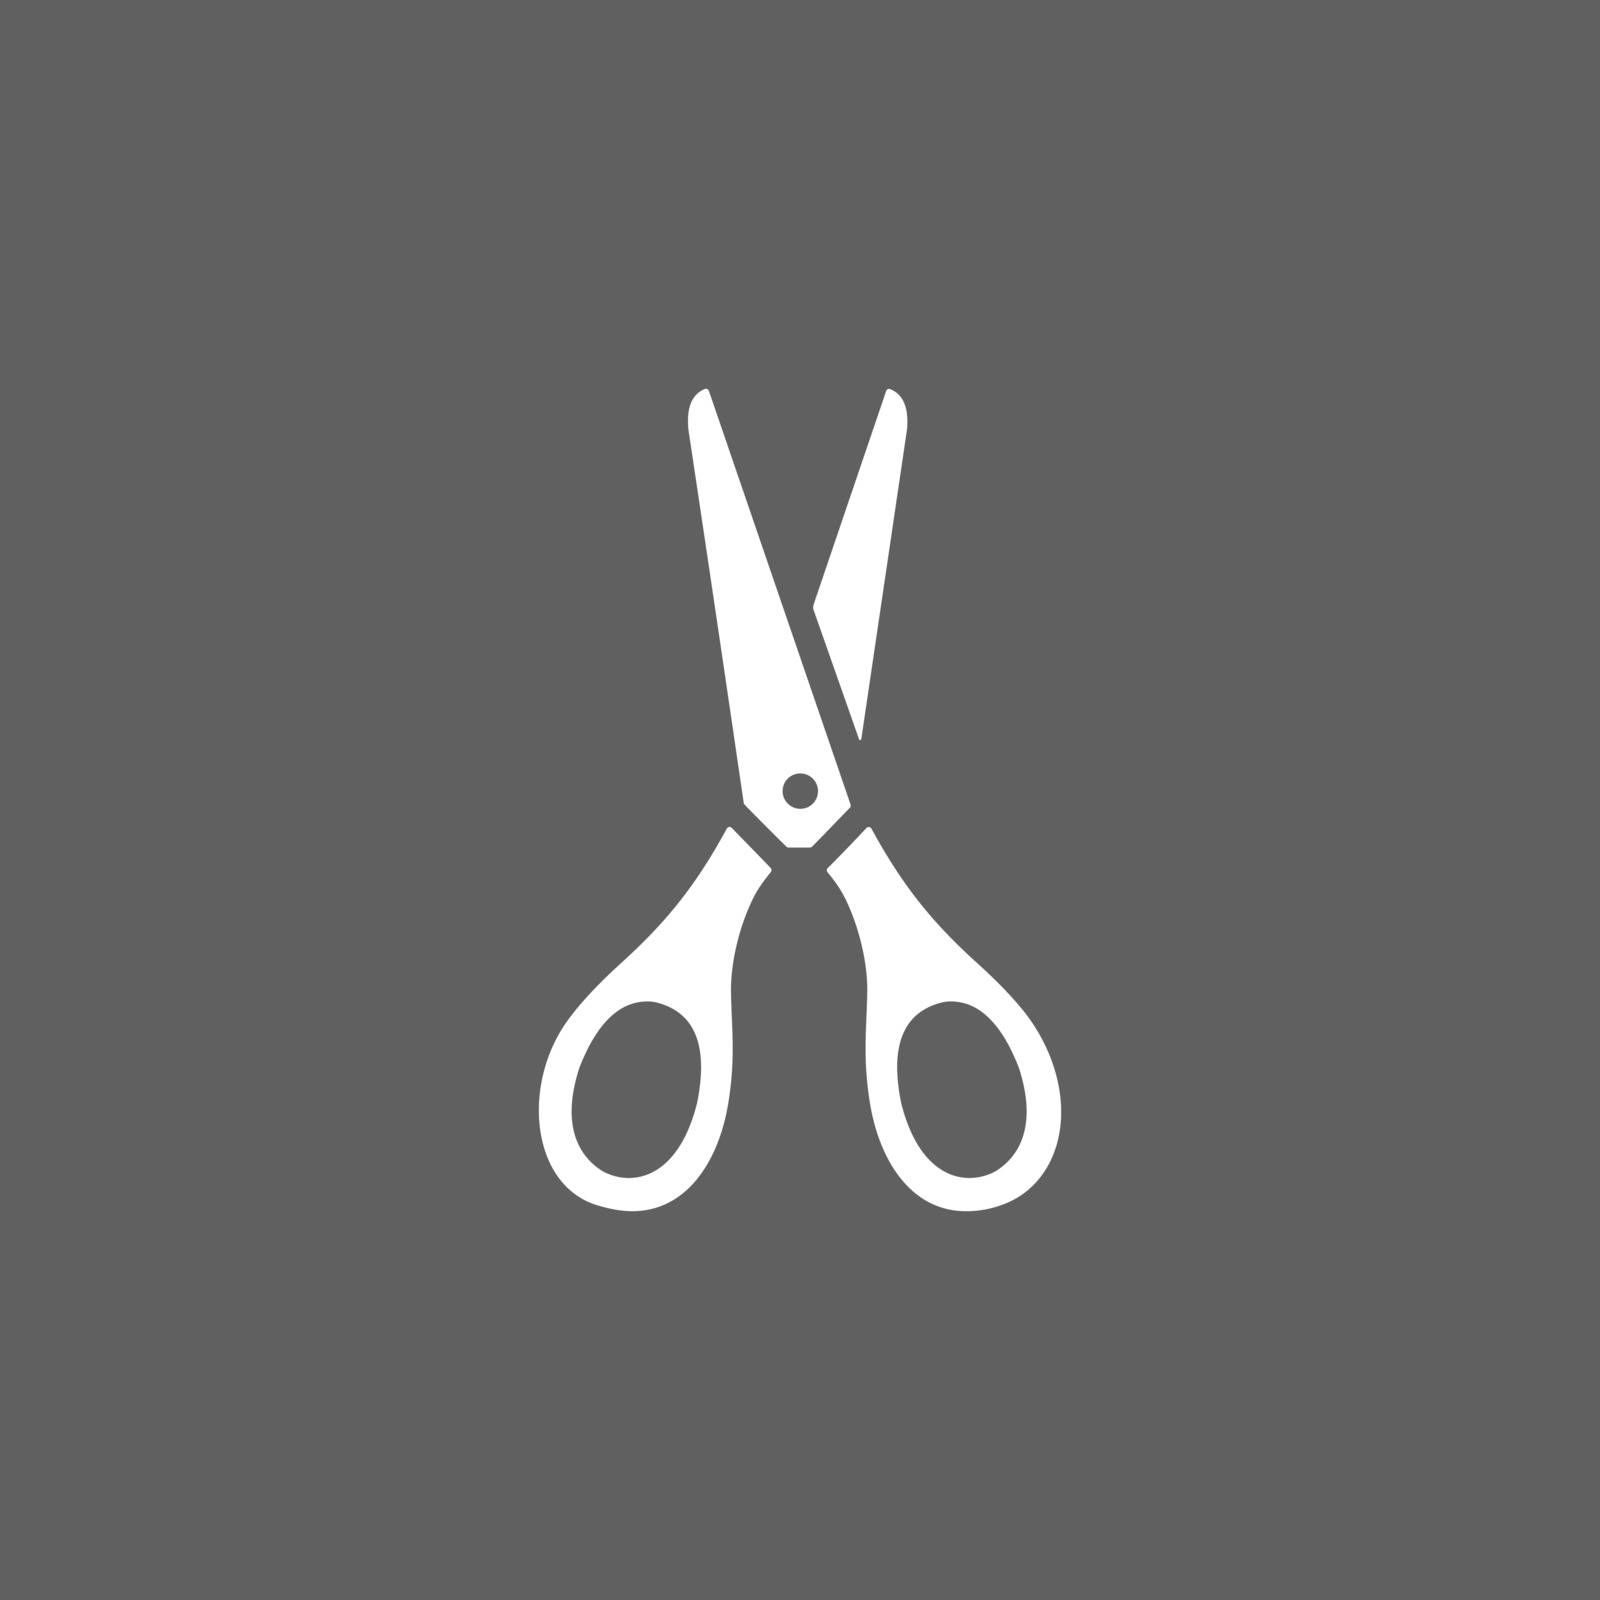 Scissors icon on a dark background by Imaagio